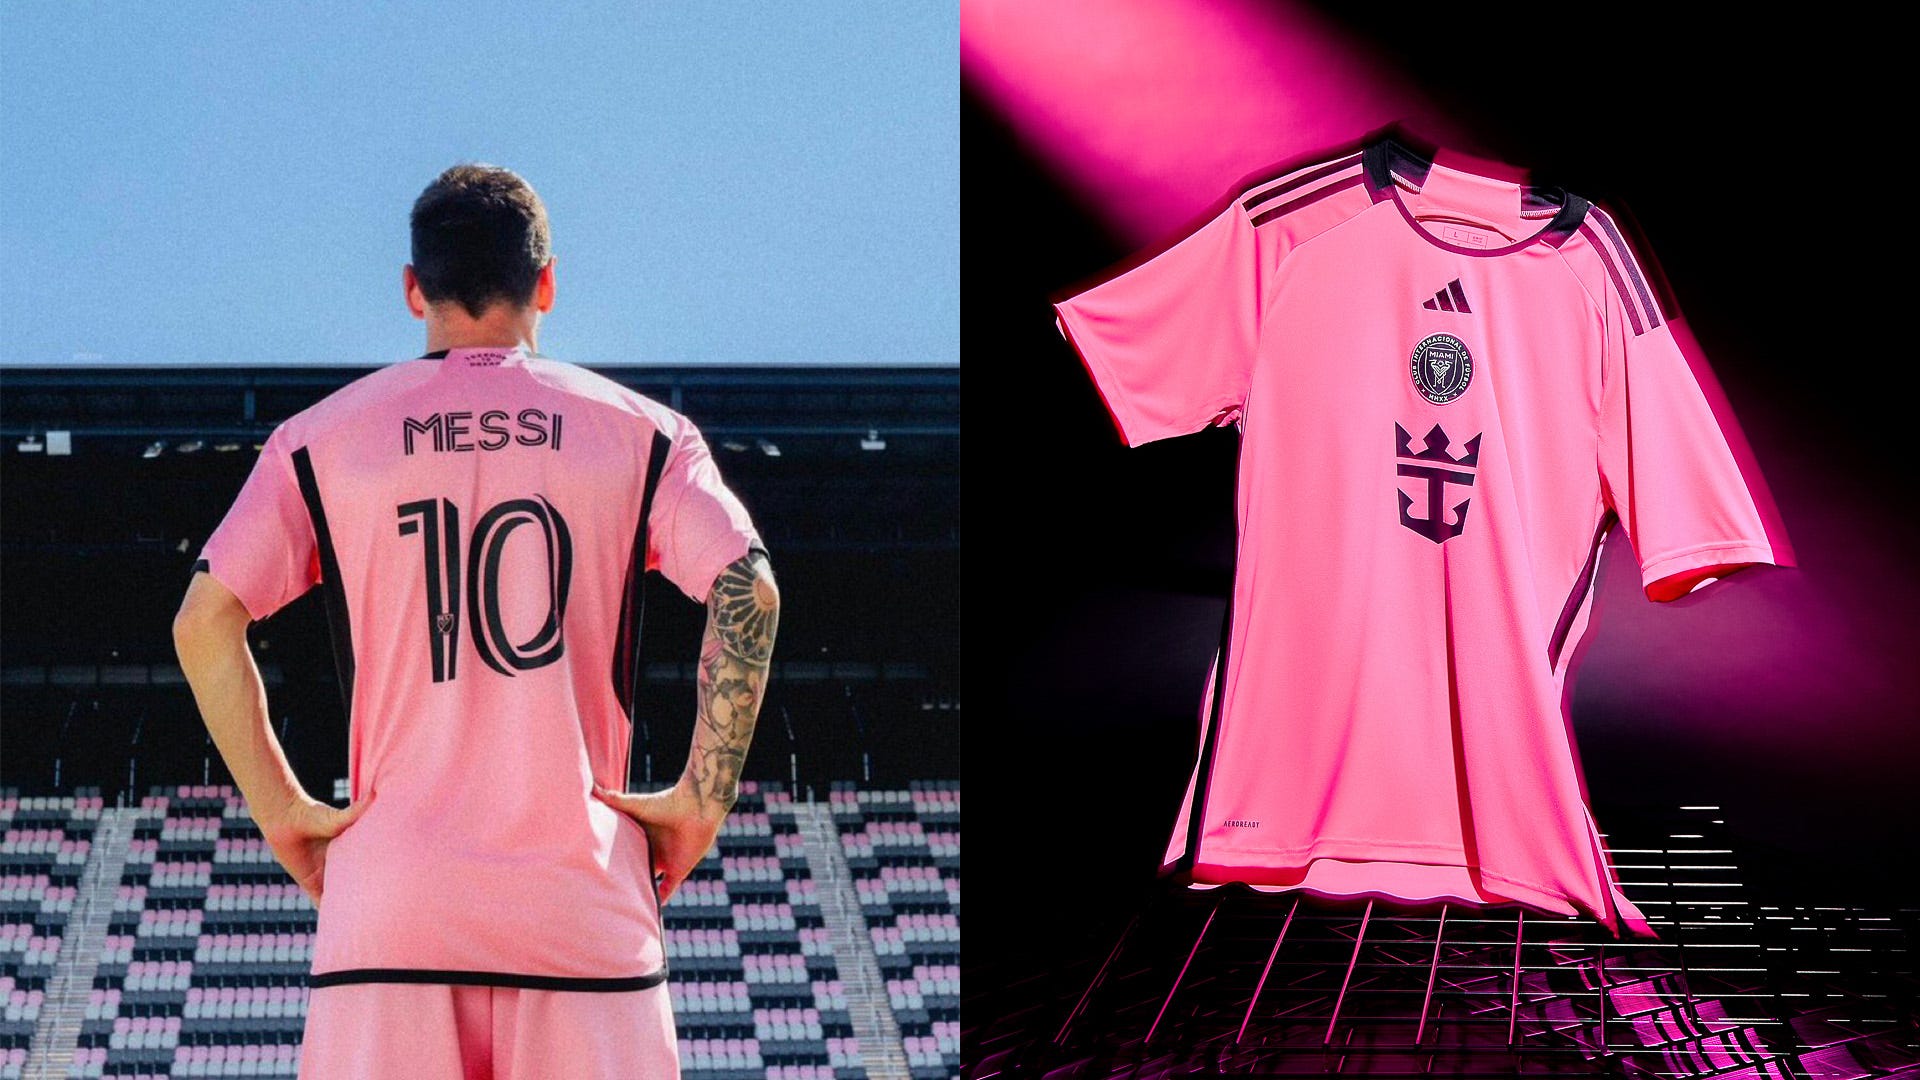 messi's jersey